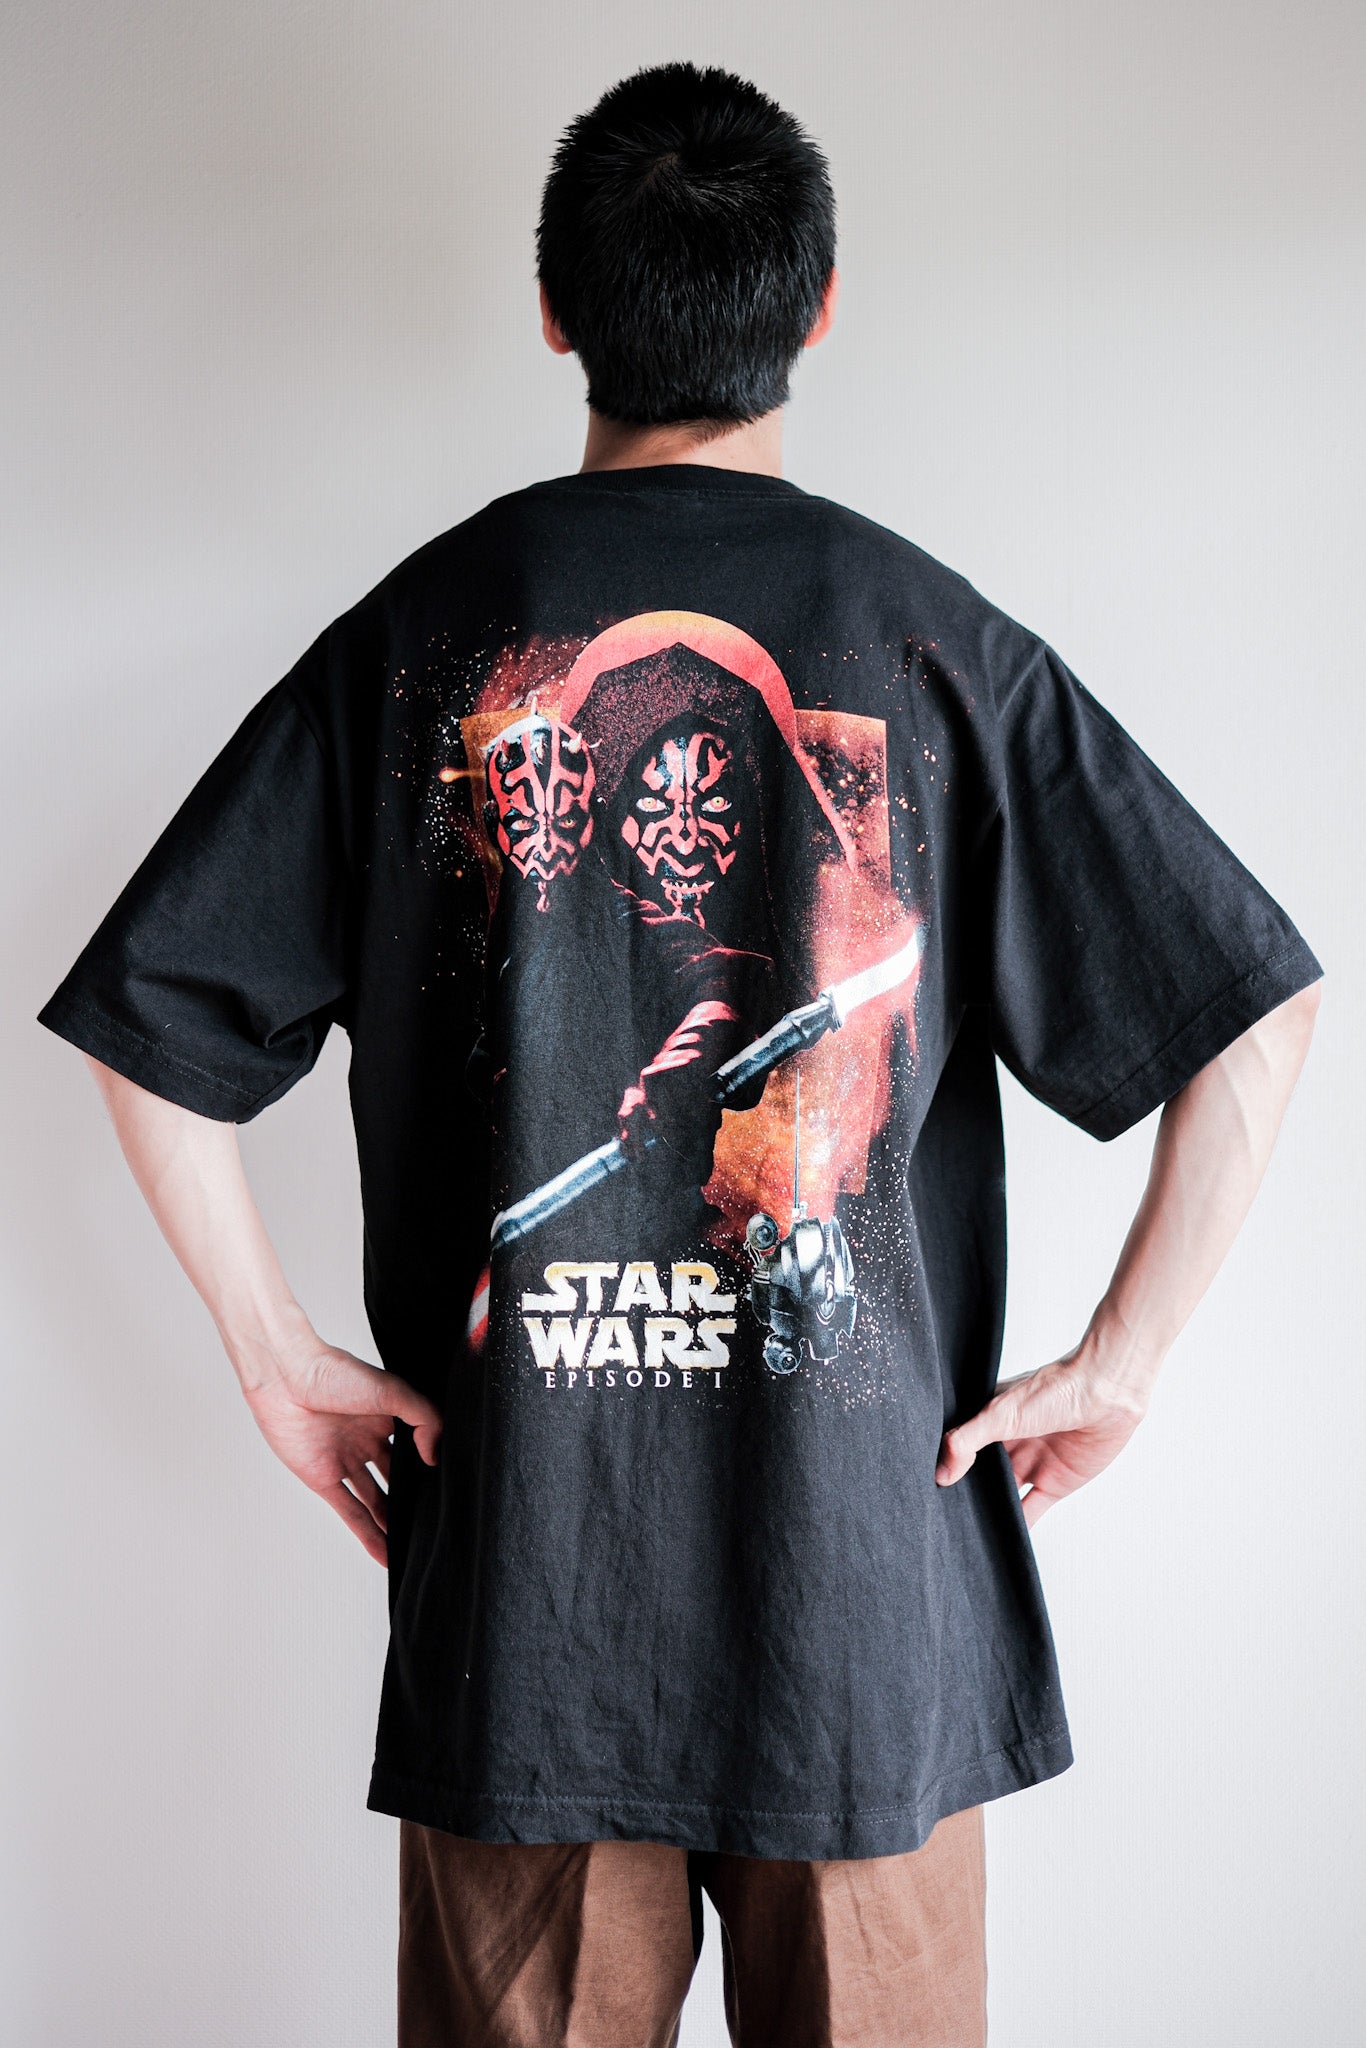 [~ 90's] Vintage Movie Print T-shirt size.L "Star Wars Episode I" "Made in U.S.A."